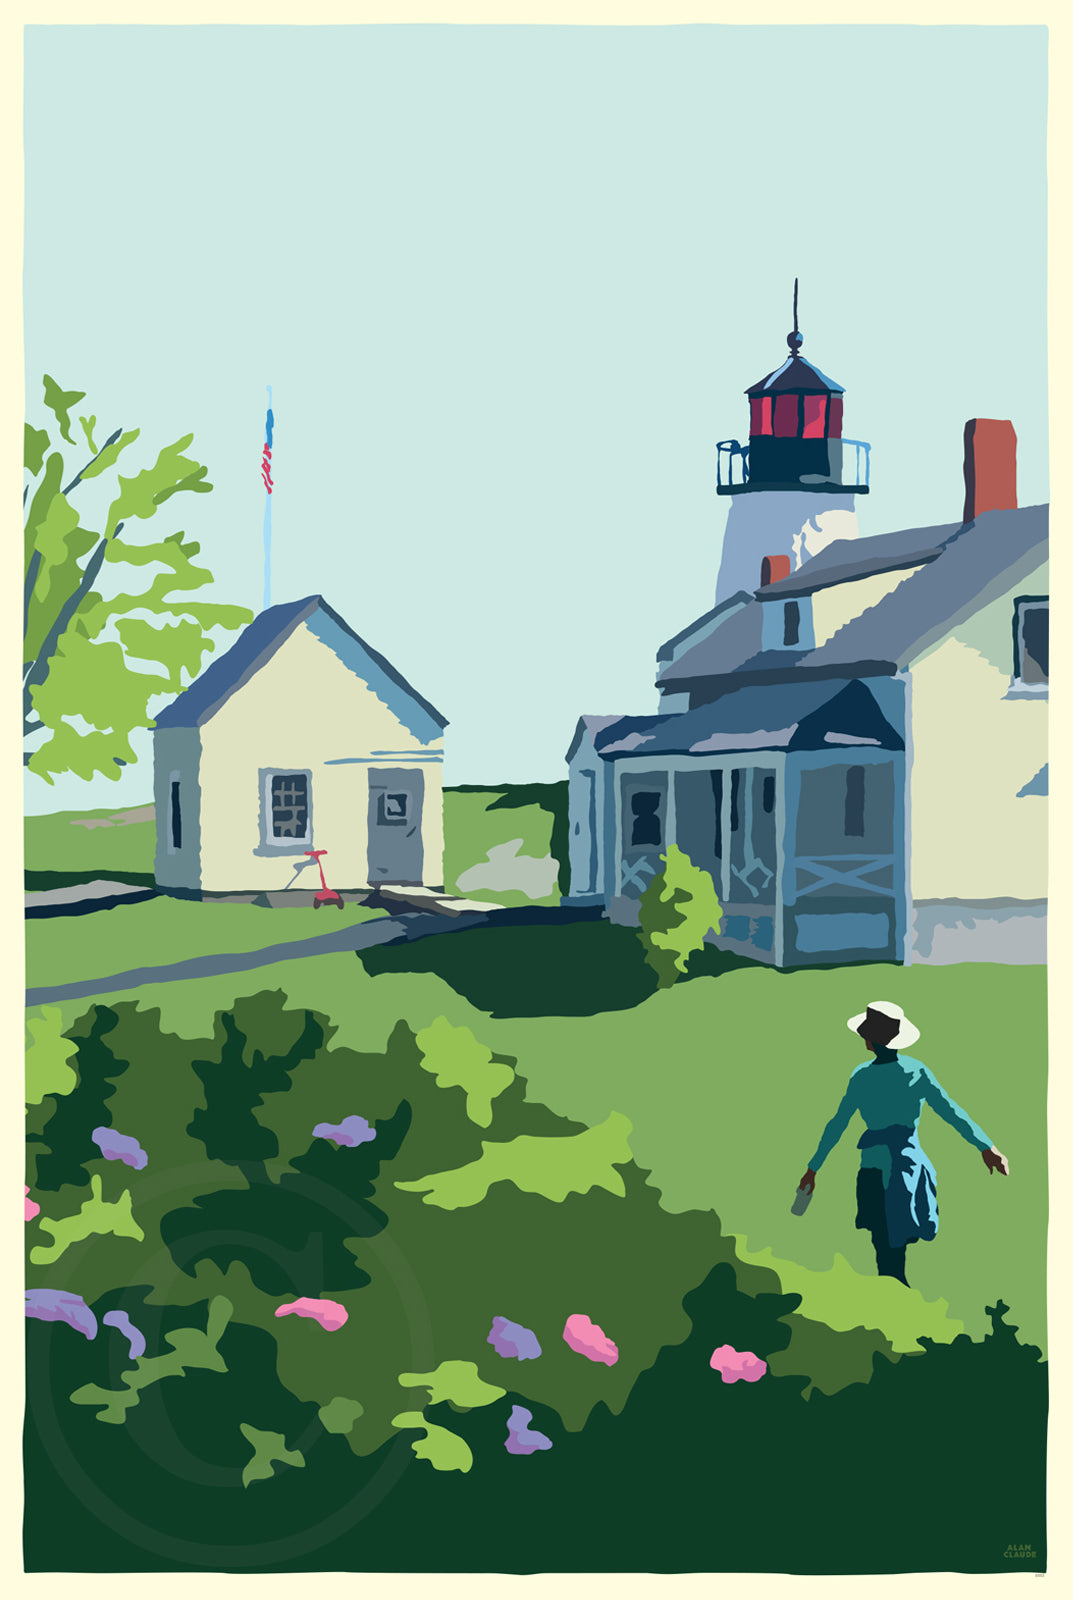 A Summer's Day On Burnt Island Light Art Print 24" x 36" Wall Poster By Alan Claude - Maine